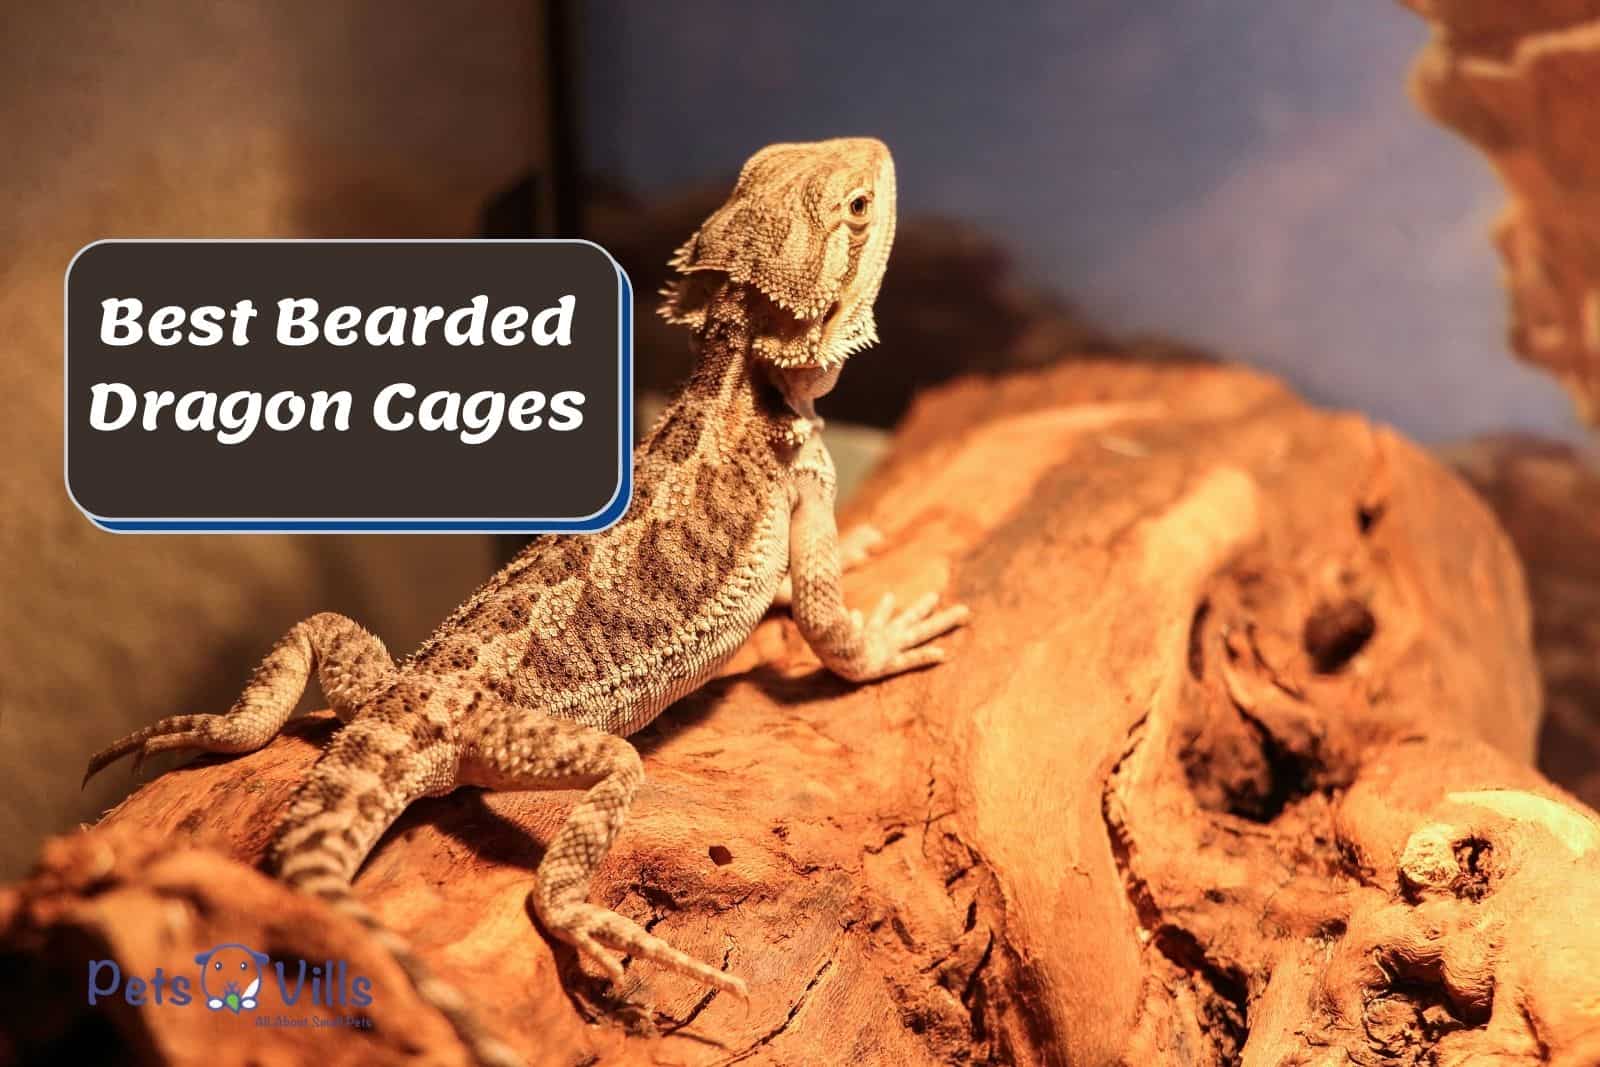 A cute bearded drafgon in a lit cage